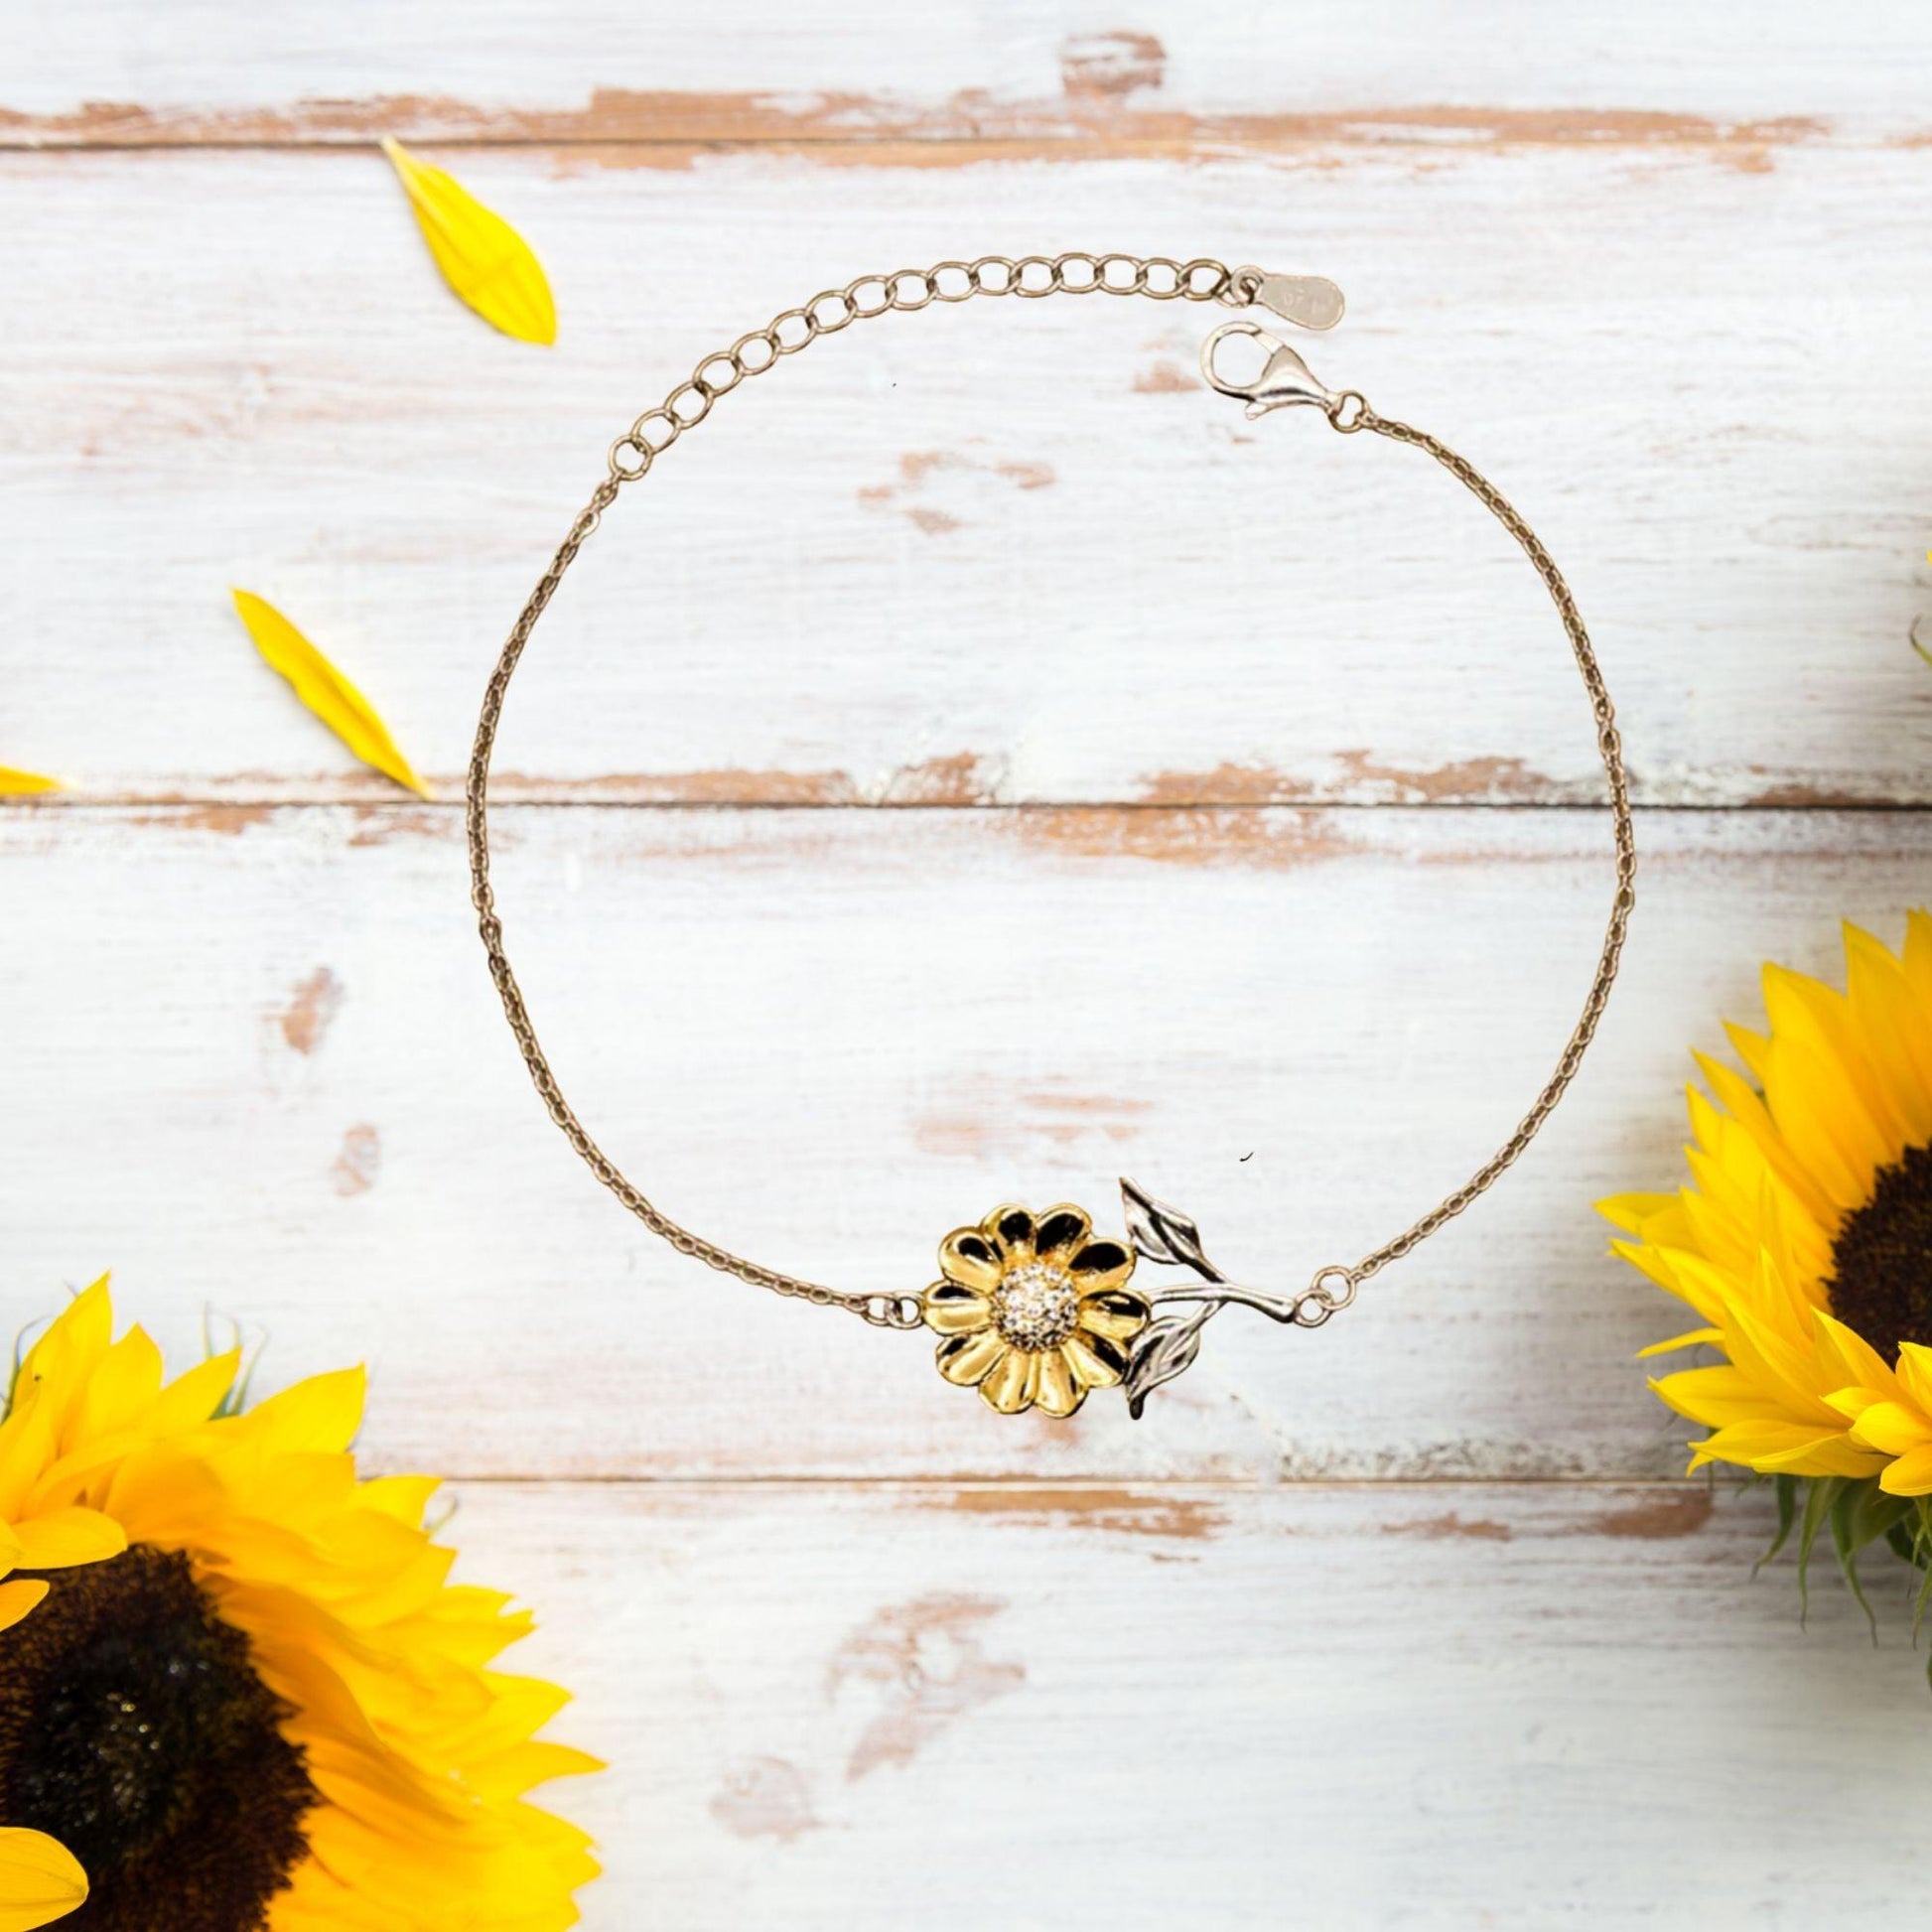 Brother In Law Sunflower Bracelet - Always follow your dreams, never forget how amazing you are, Birthday. Christmas Gifts Jewelry - Mallard Moon Gift Shop